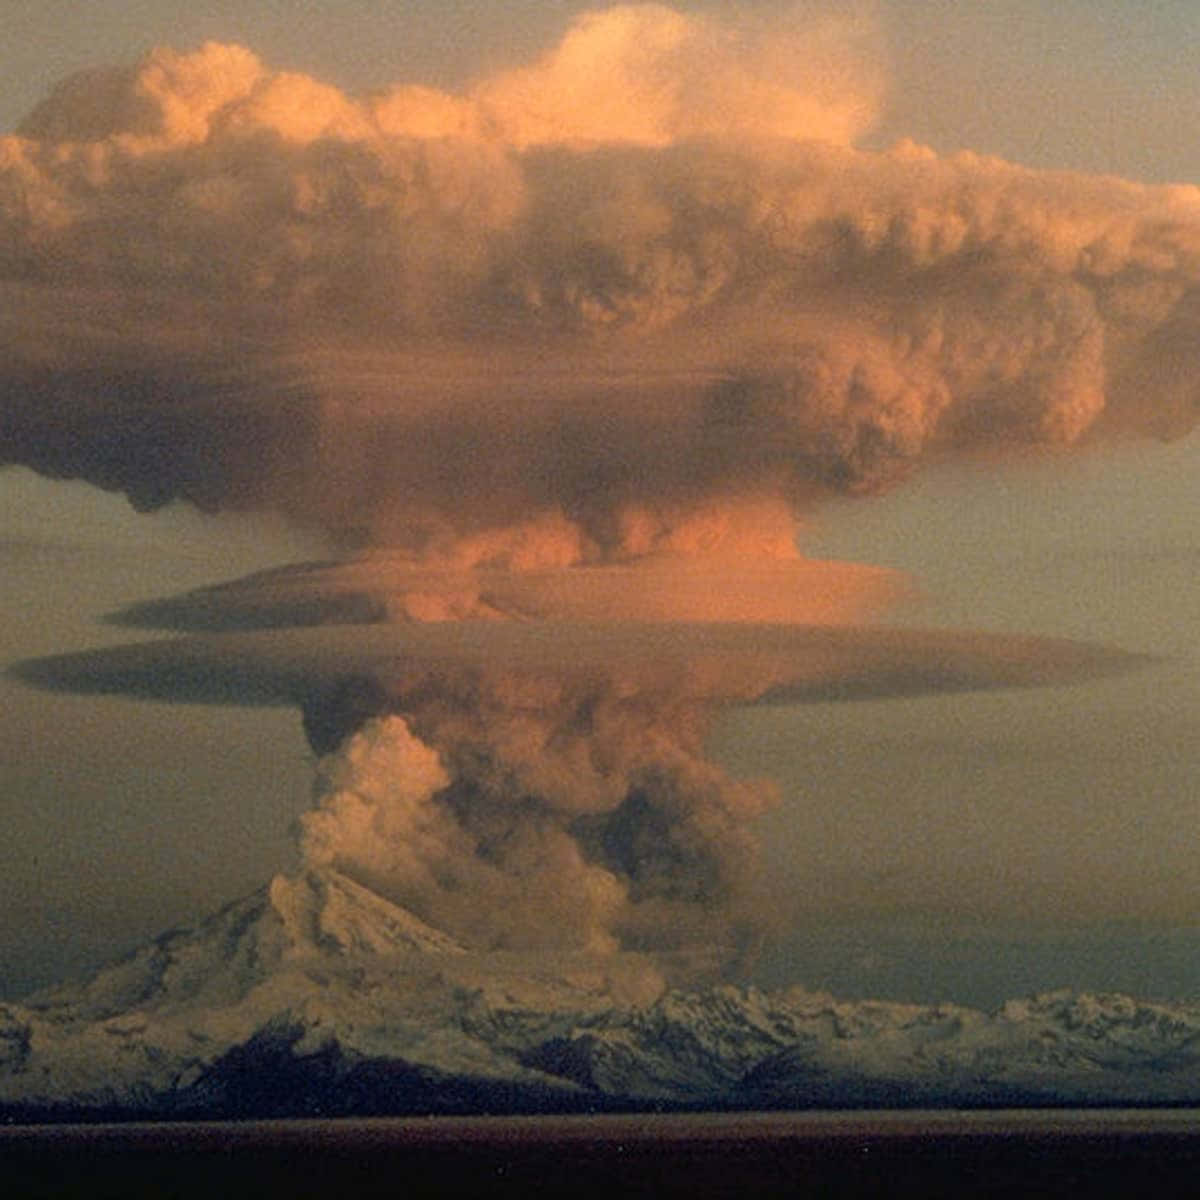 A Large Plume Of Smoke Is Seen From A Volcano